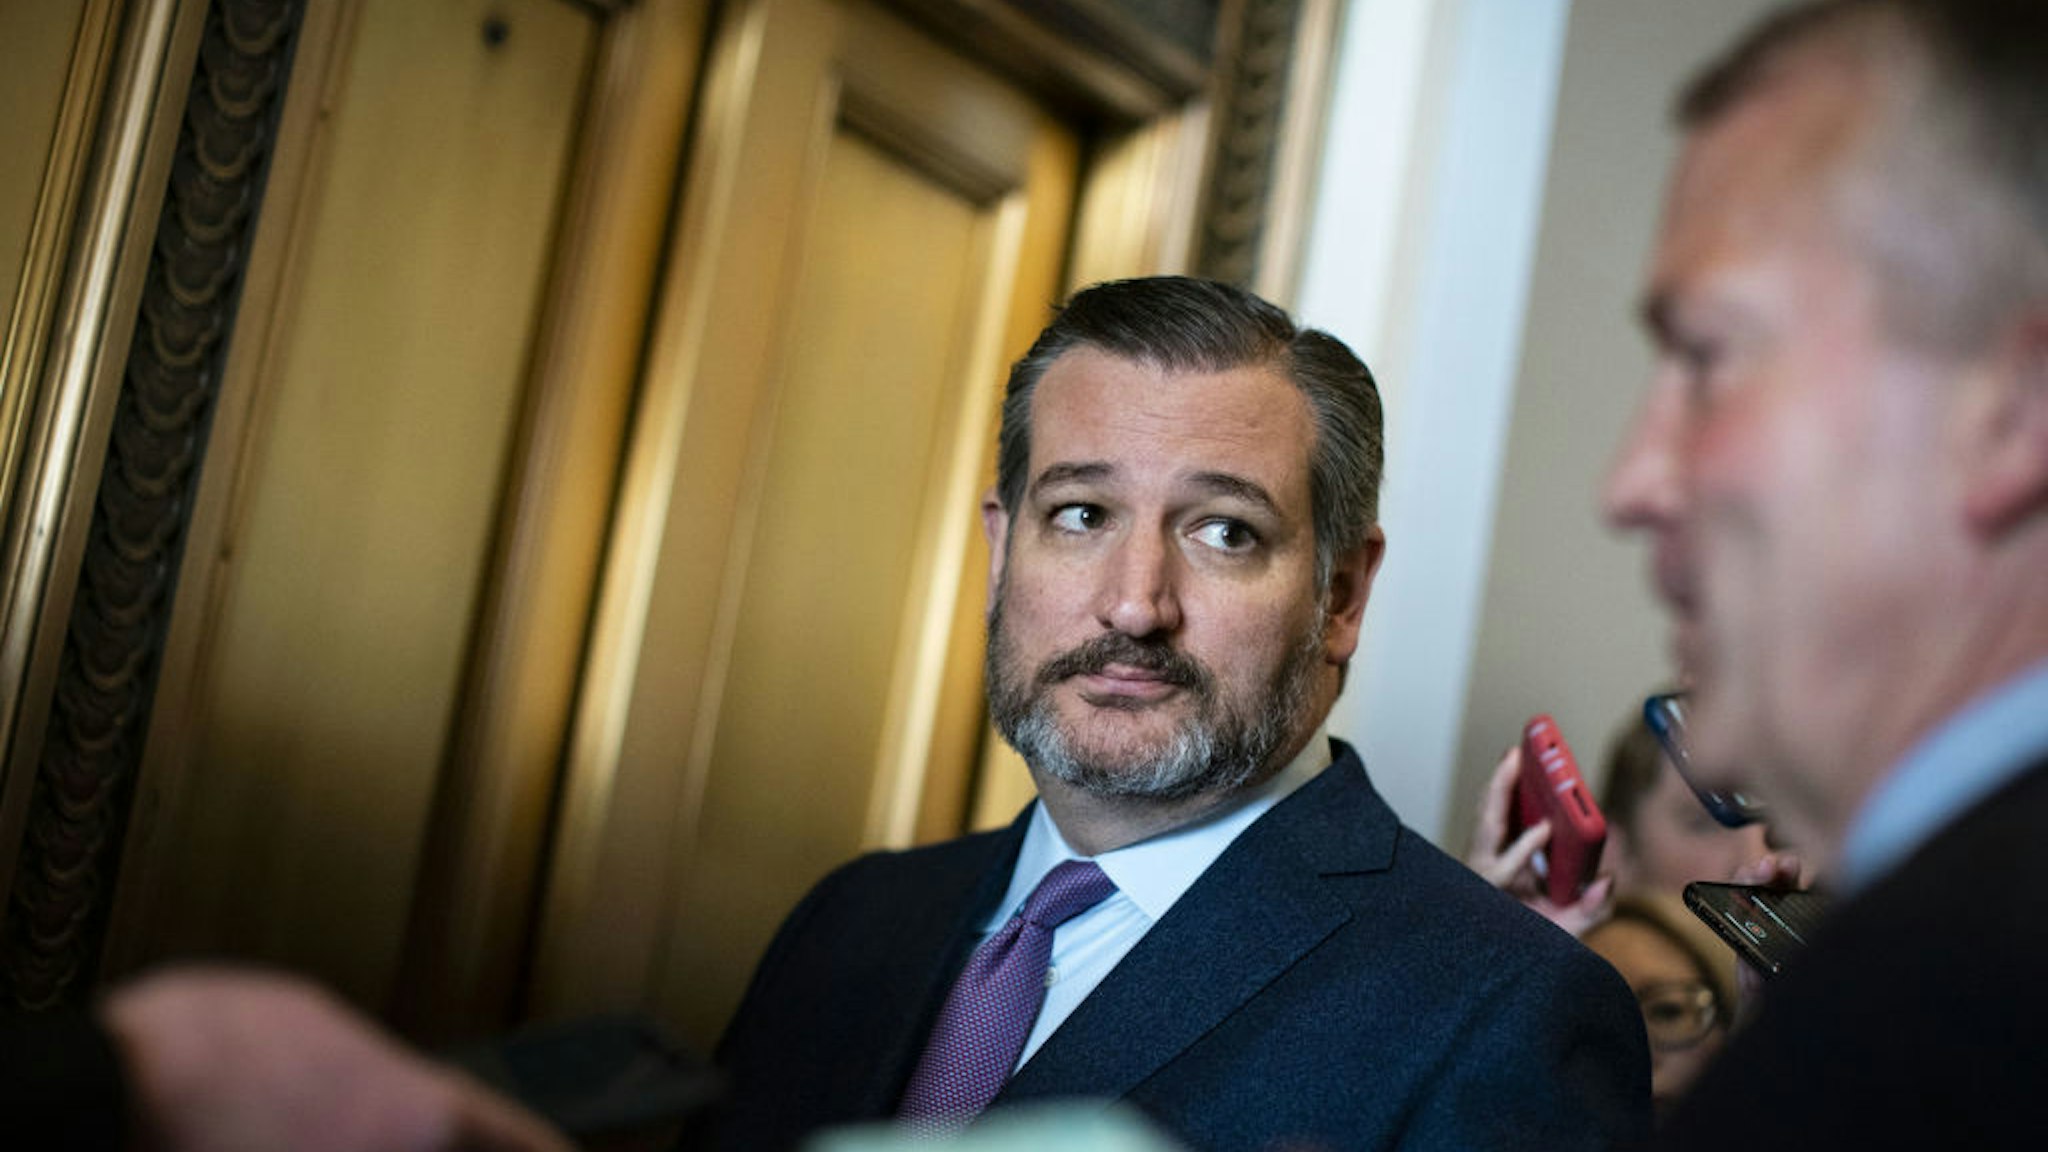 Senator Ted Cruz, a Republican from Texas, listens to a question while exiting a caucus meeting on Capitol Hill in Washington, D.C., U.S., on Wednesday, March 18, 2020.